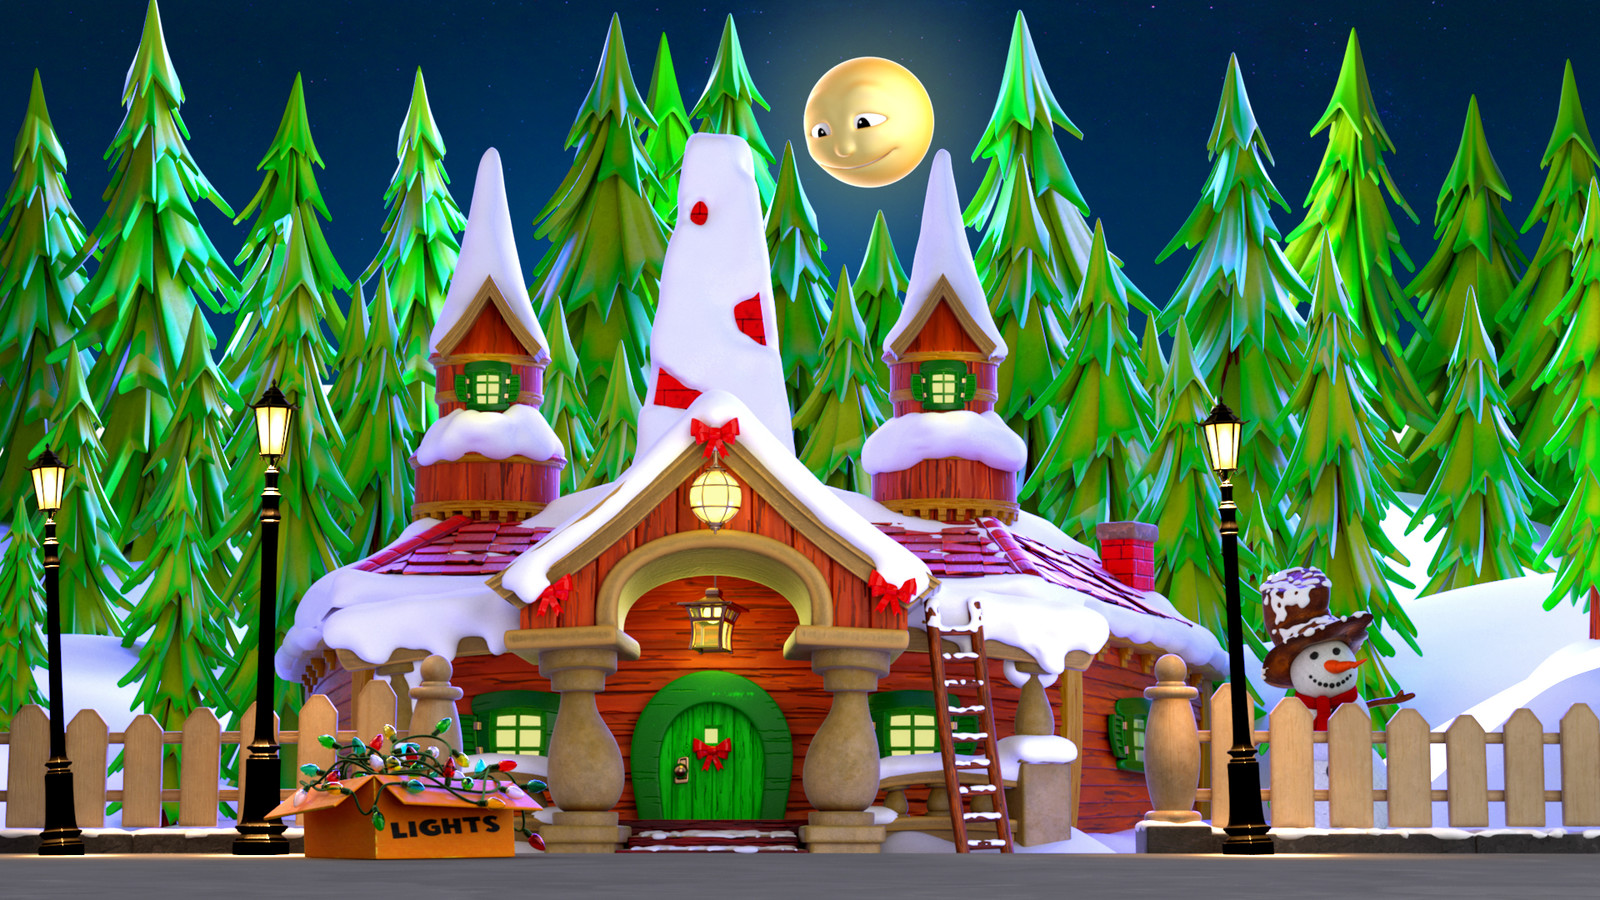 This is one of the main sets I worked on, the exterior of Mickey’s house. I was responsible for all modelling, texturing, shading and lighting of this scene, excluding the background trees.